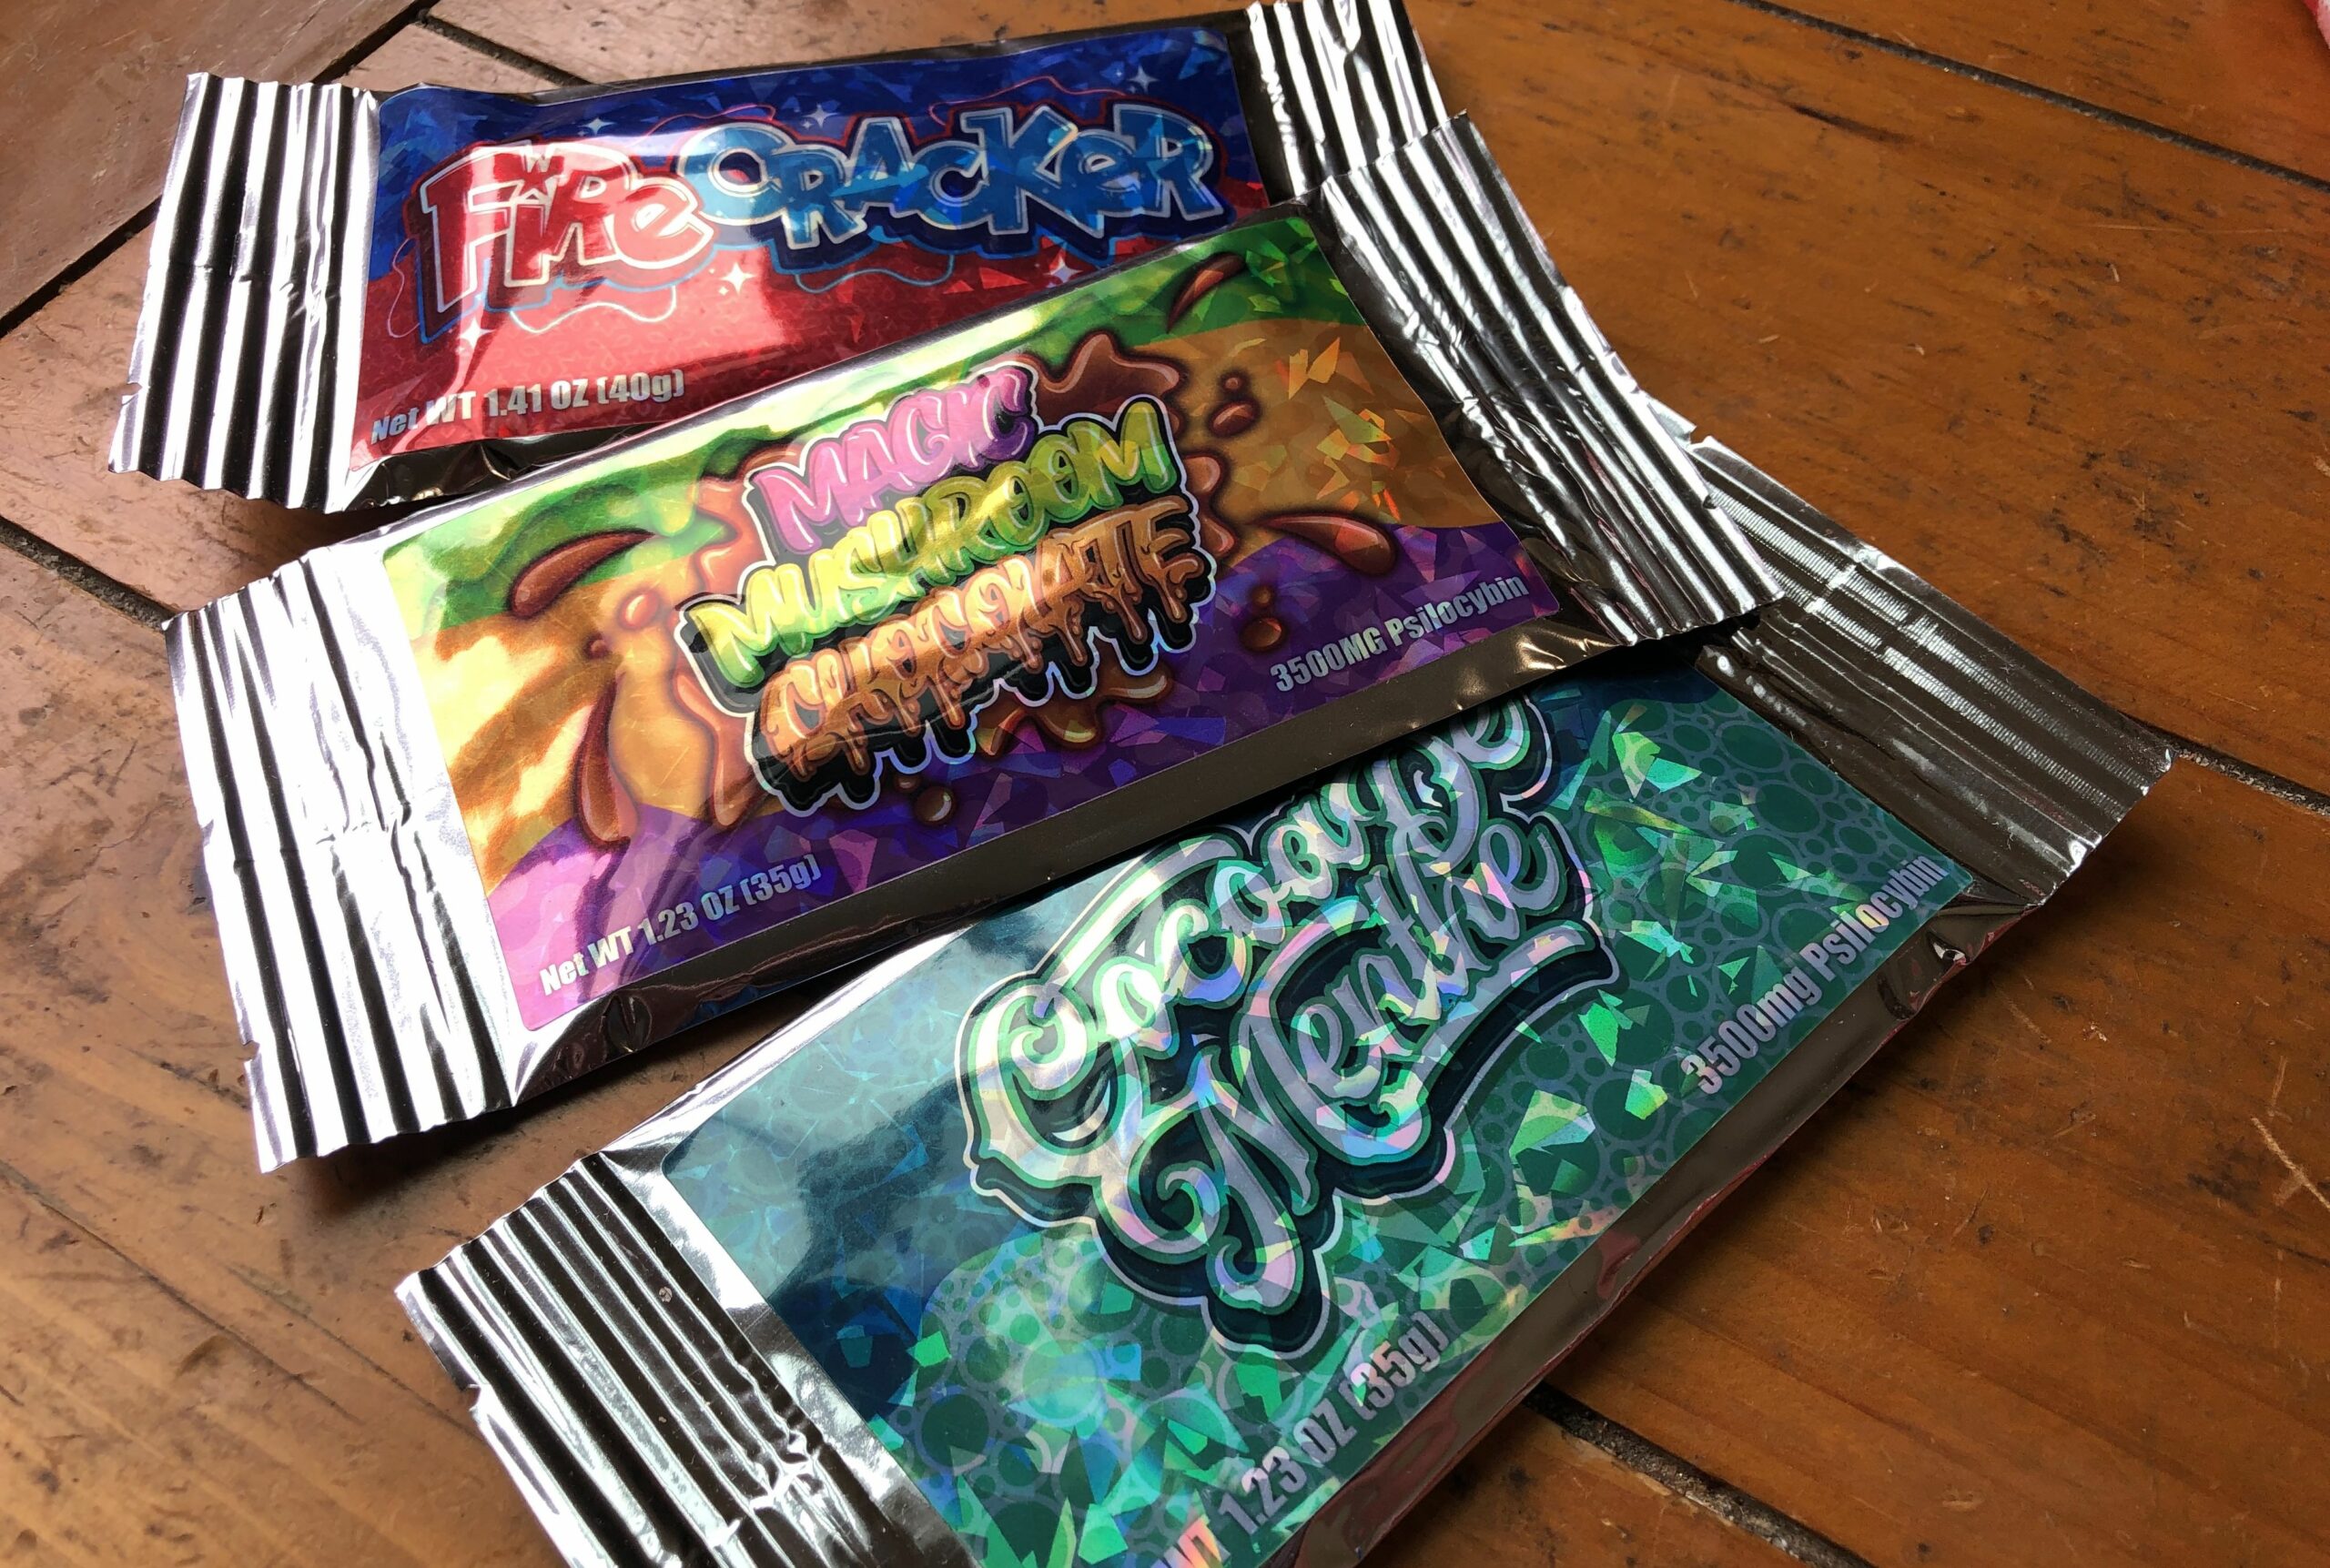 You Can Buy Magic Mushroom Candy Bars Over the Counter in Oakland